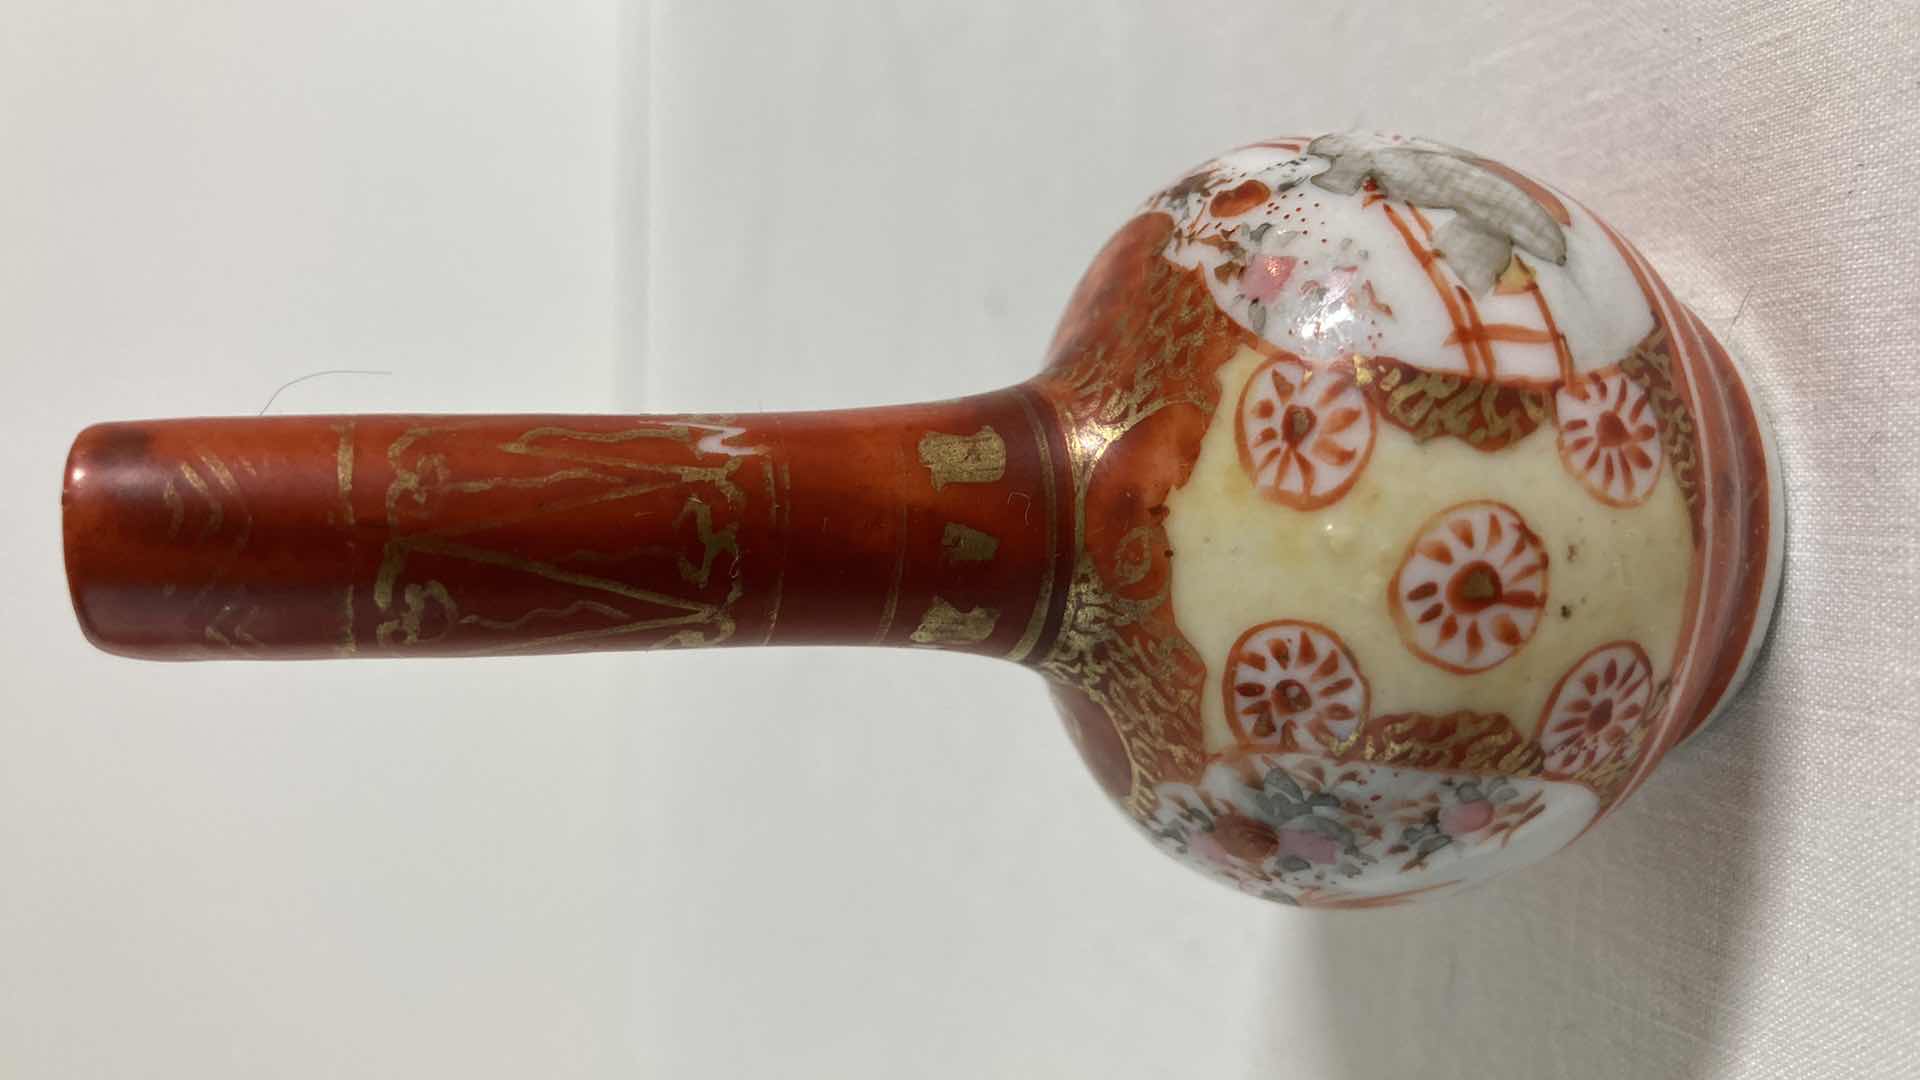 Photo 2 of EARLY CENTURY JAPANESE MINIATURE HAND PAINTED PORCELAIN VASE SIGNED BY ARTIST 1.75” X 3.5”